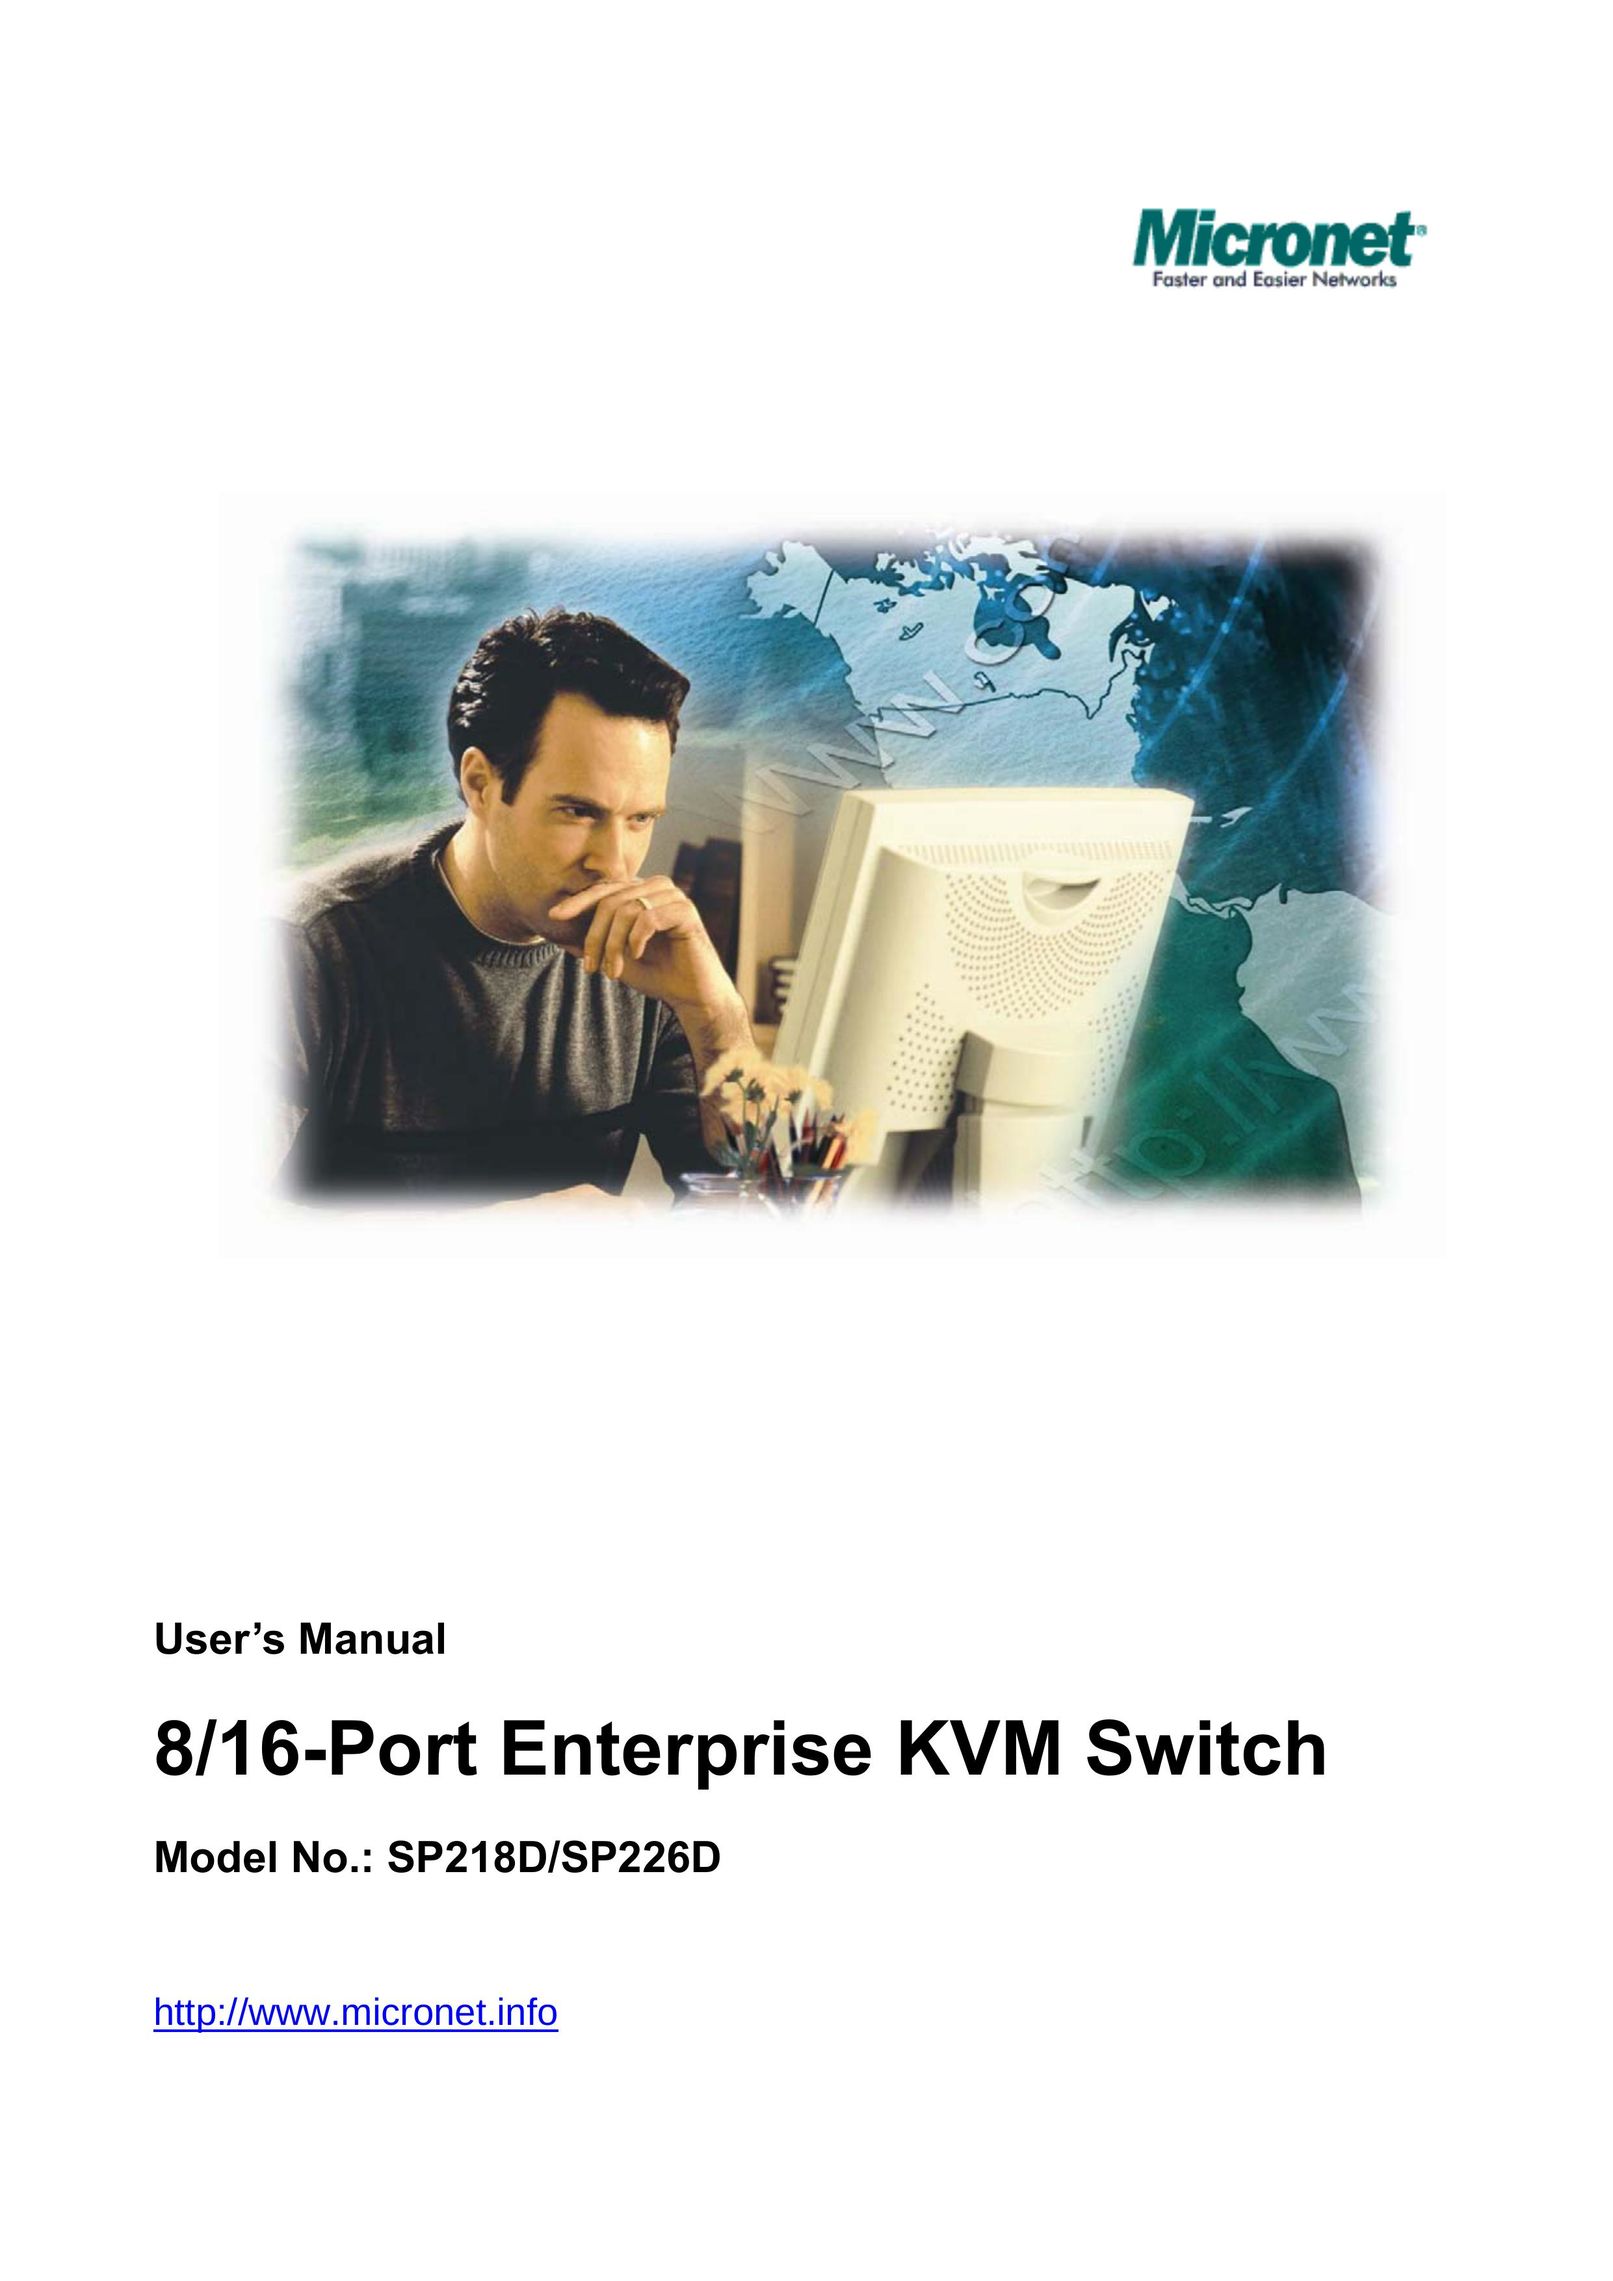 MicroNet Technology SP226D Switch User Manual